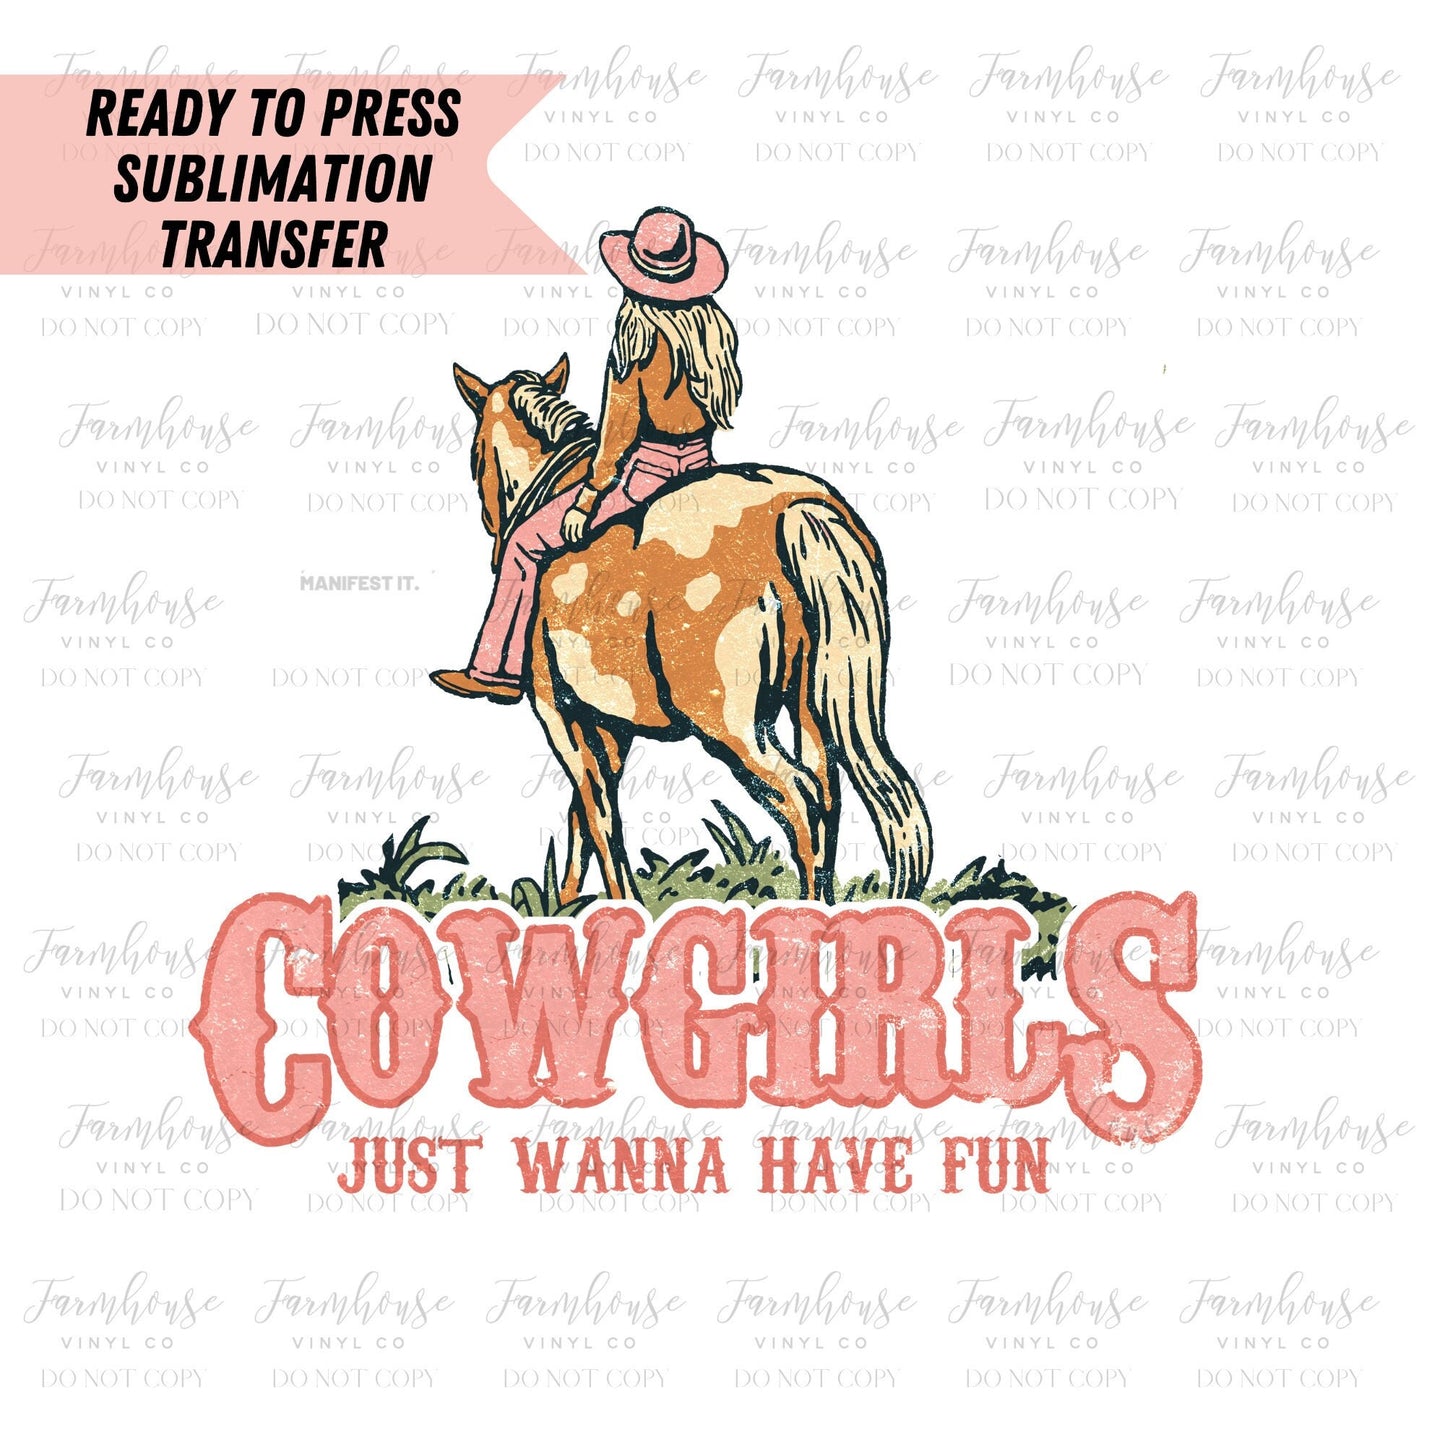 Cowgirls Just Want to Have Fun Ready To Press Sublimation Transfer - Farmhouse Vinyl Co